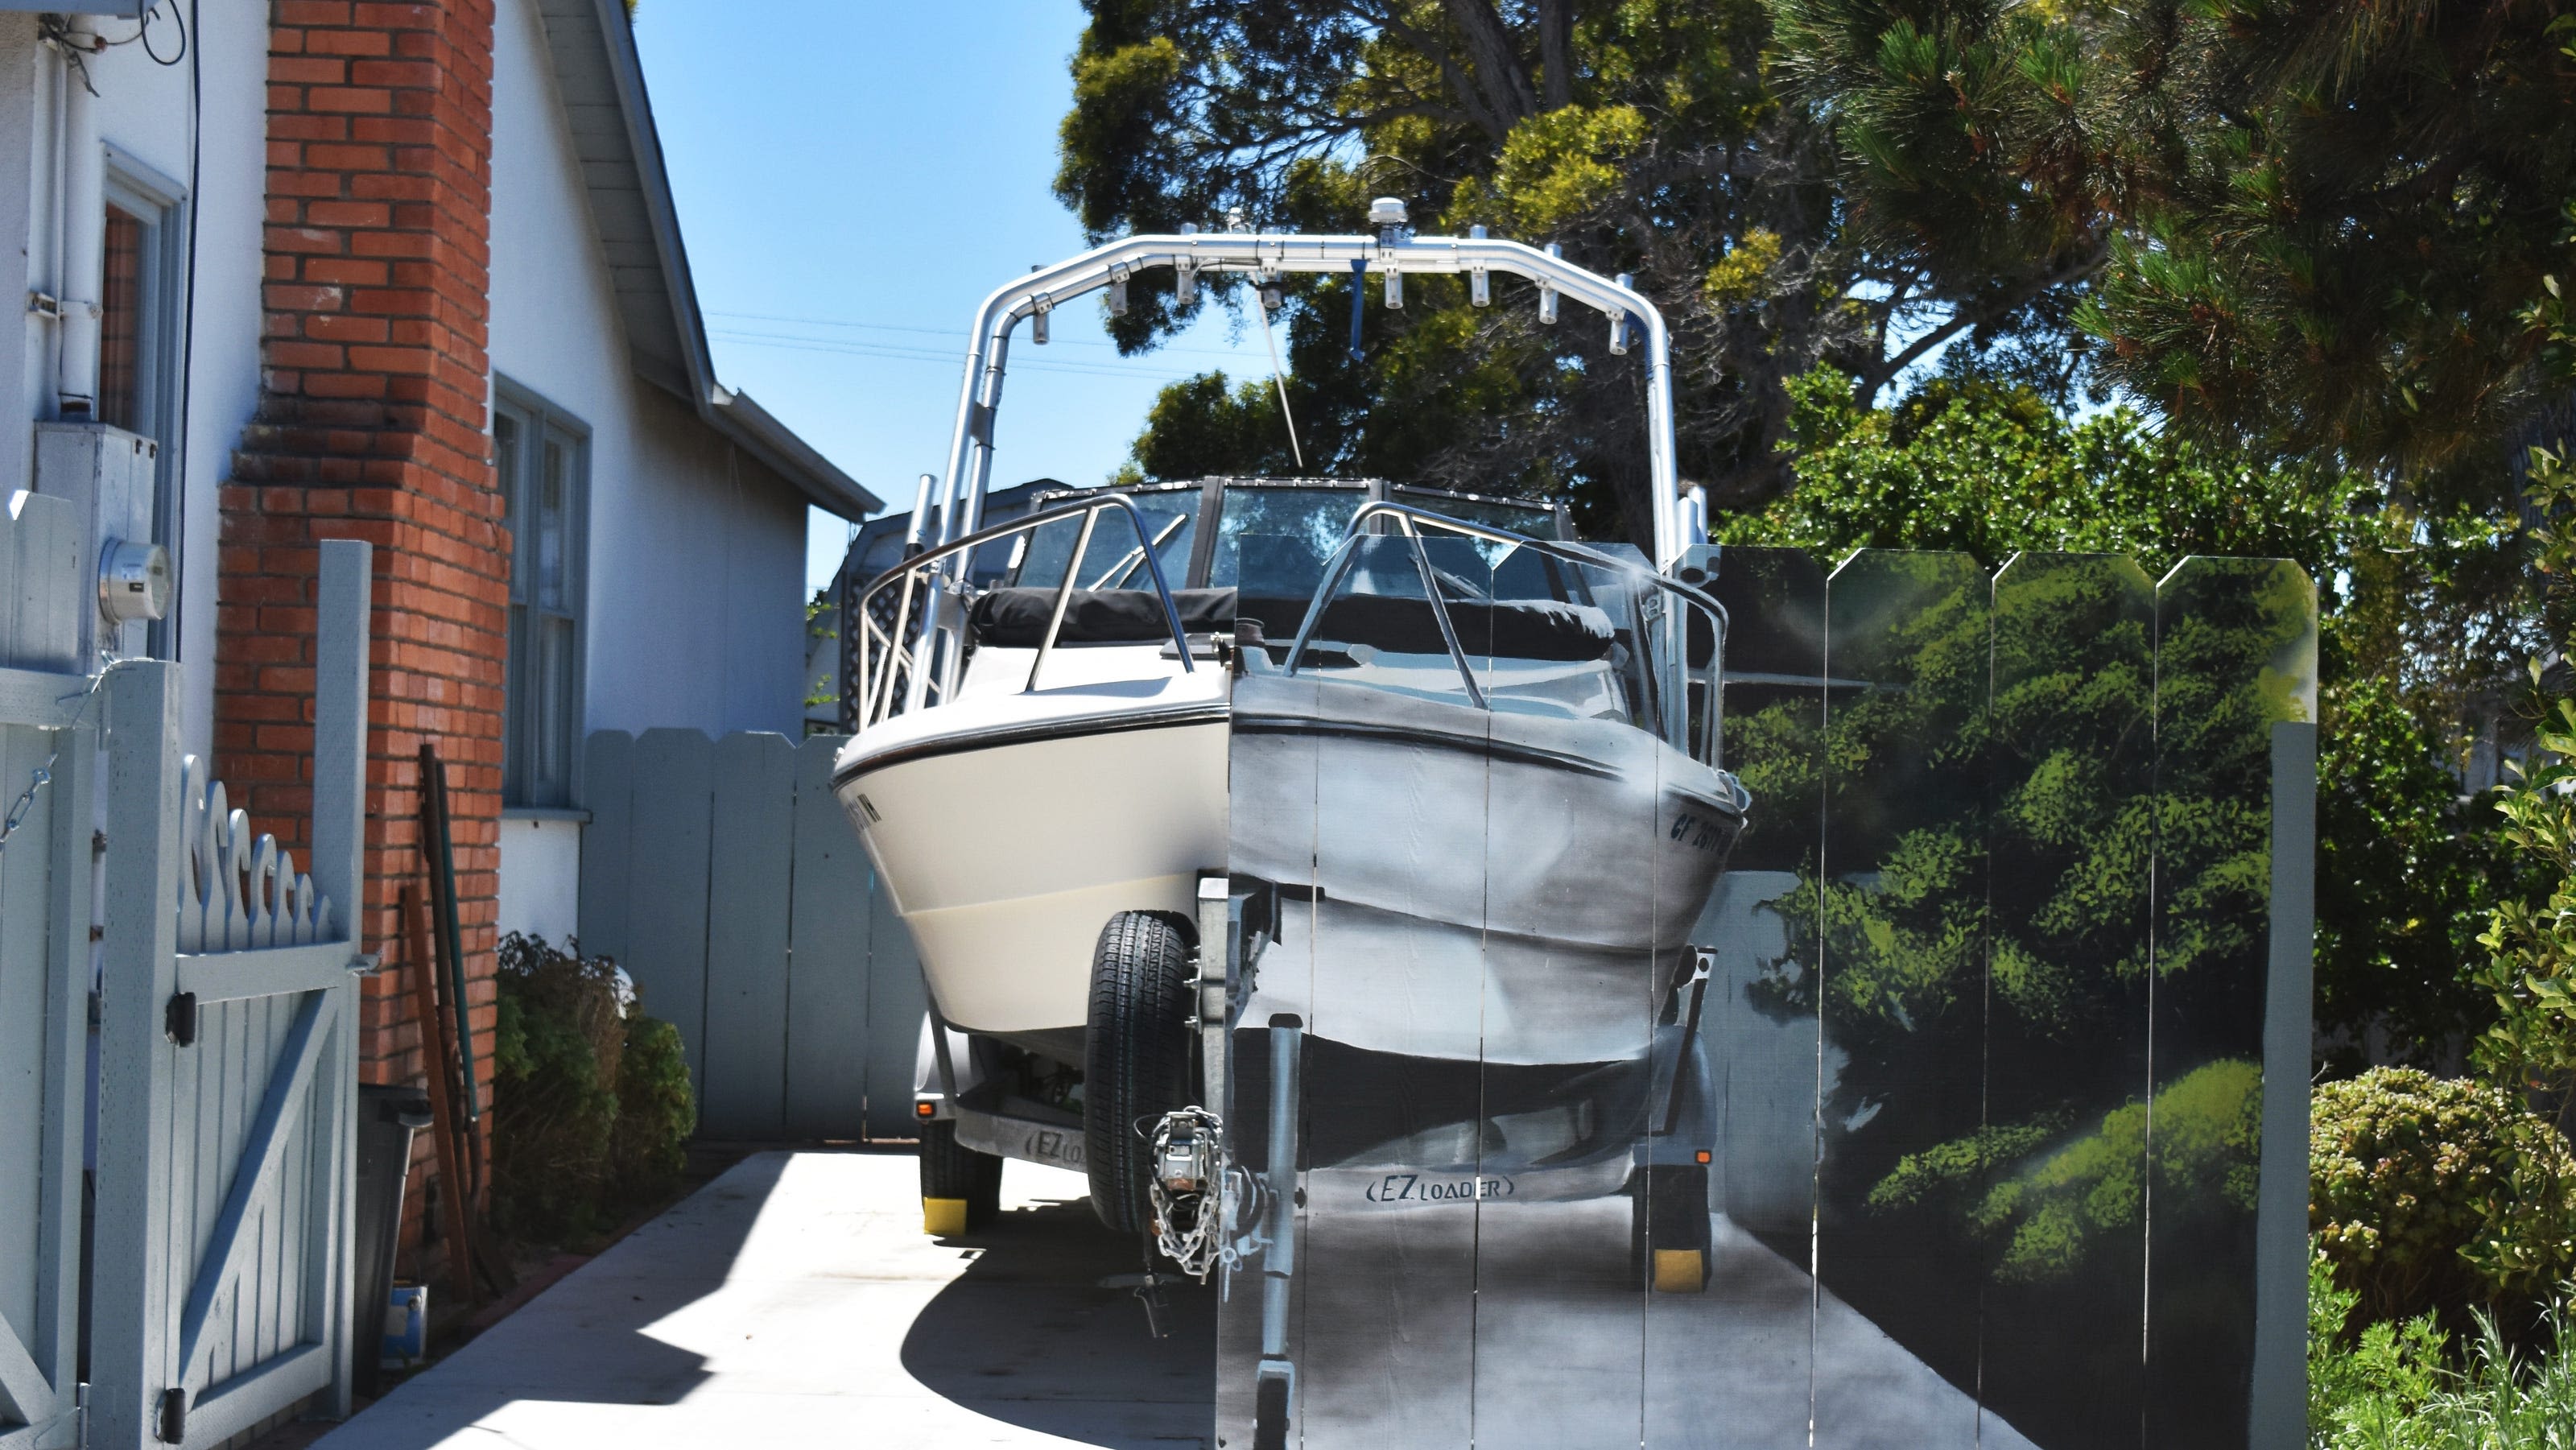 No boats? OK. A clever California homeowner paints a mural to hide a boat in his driveway